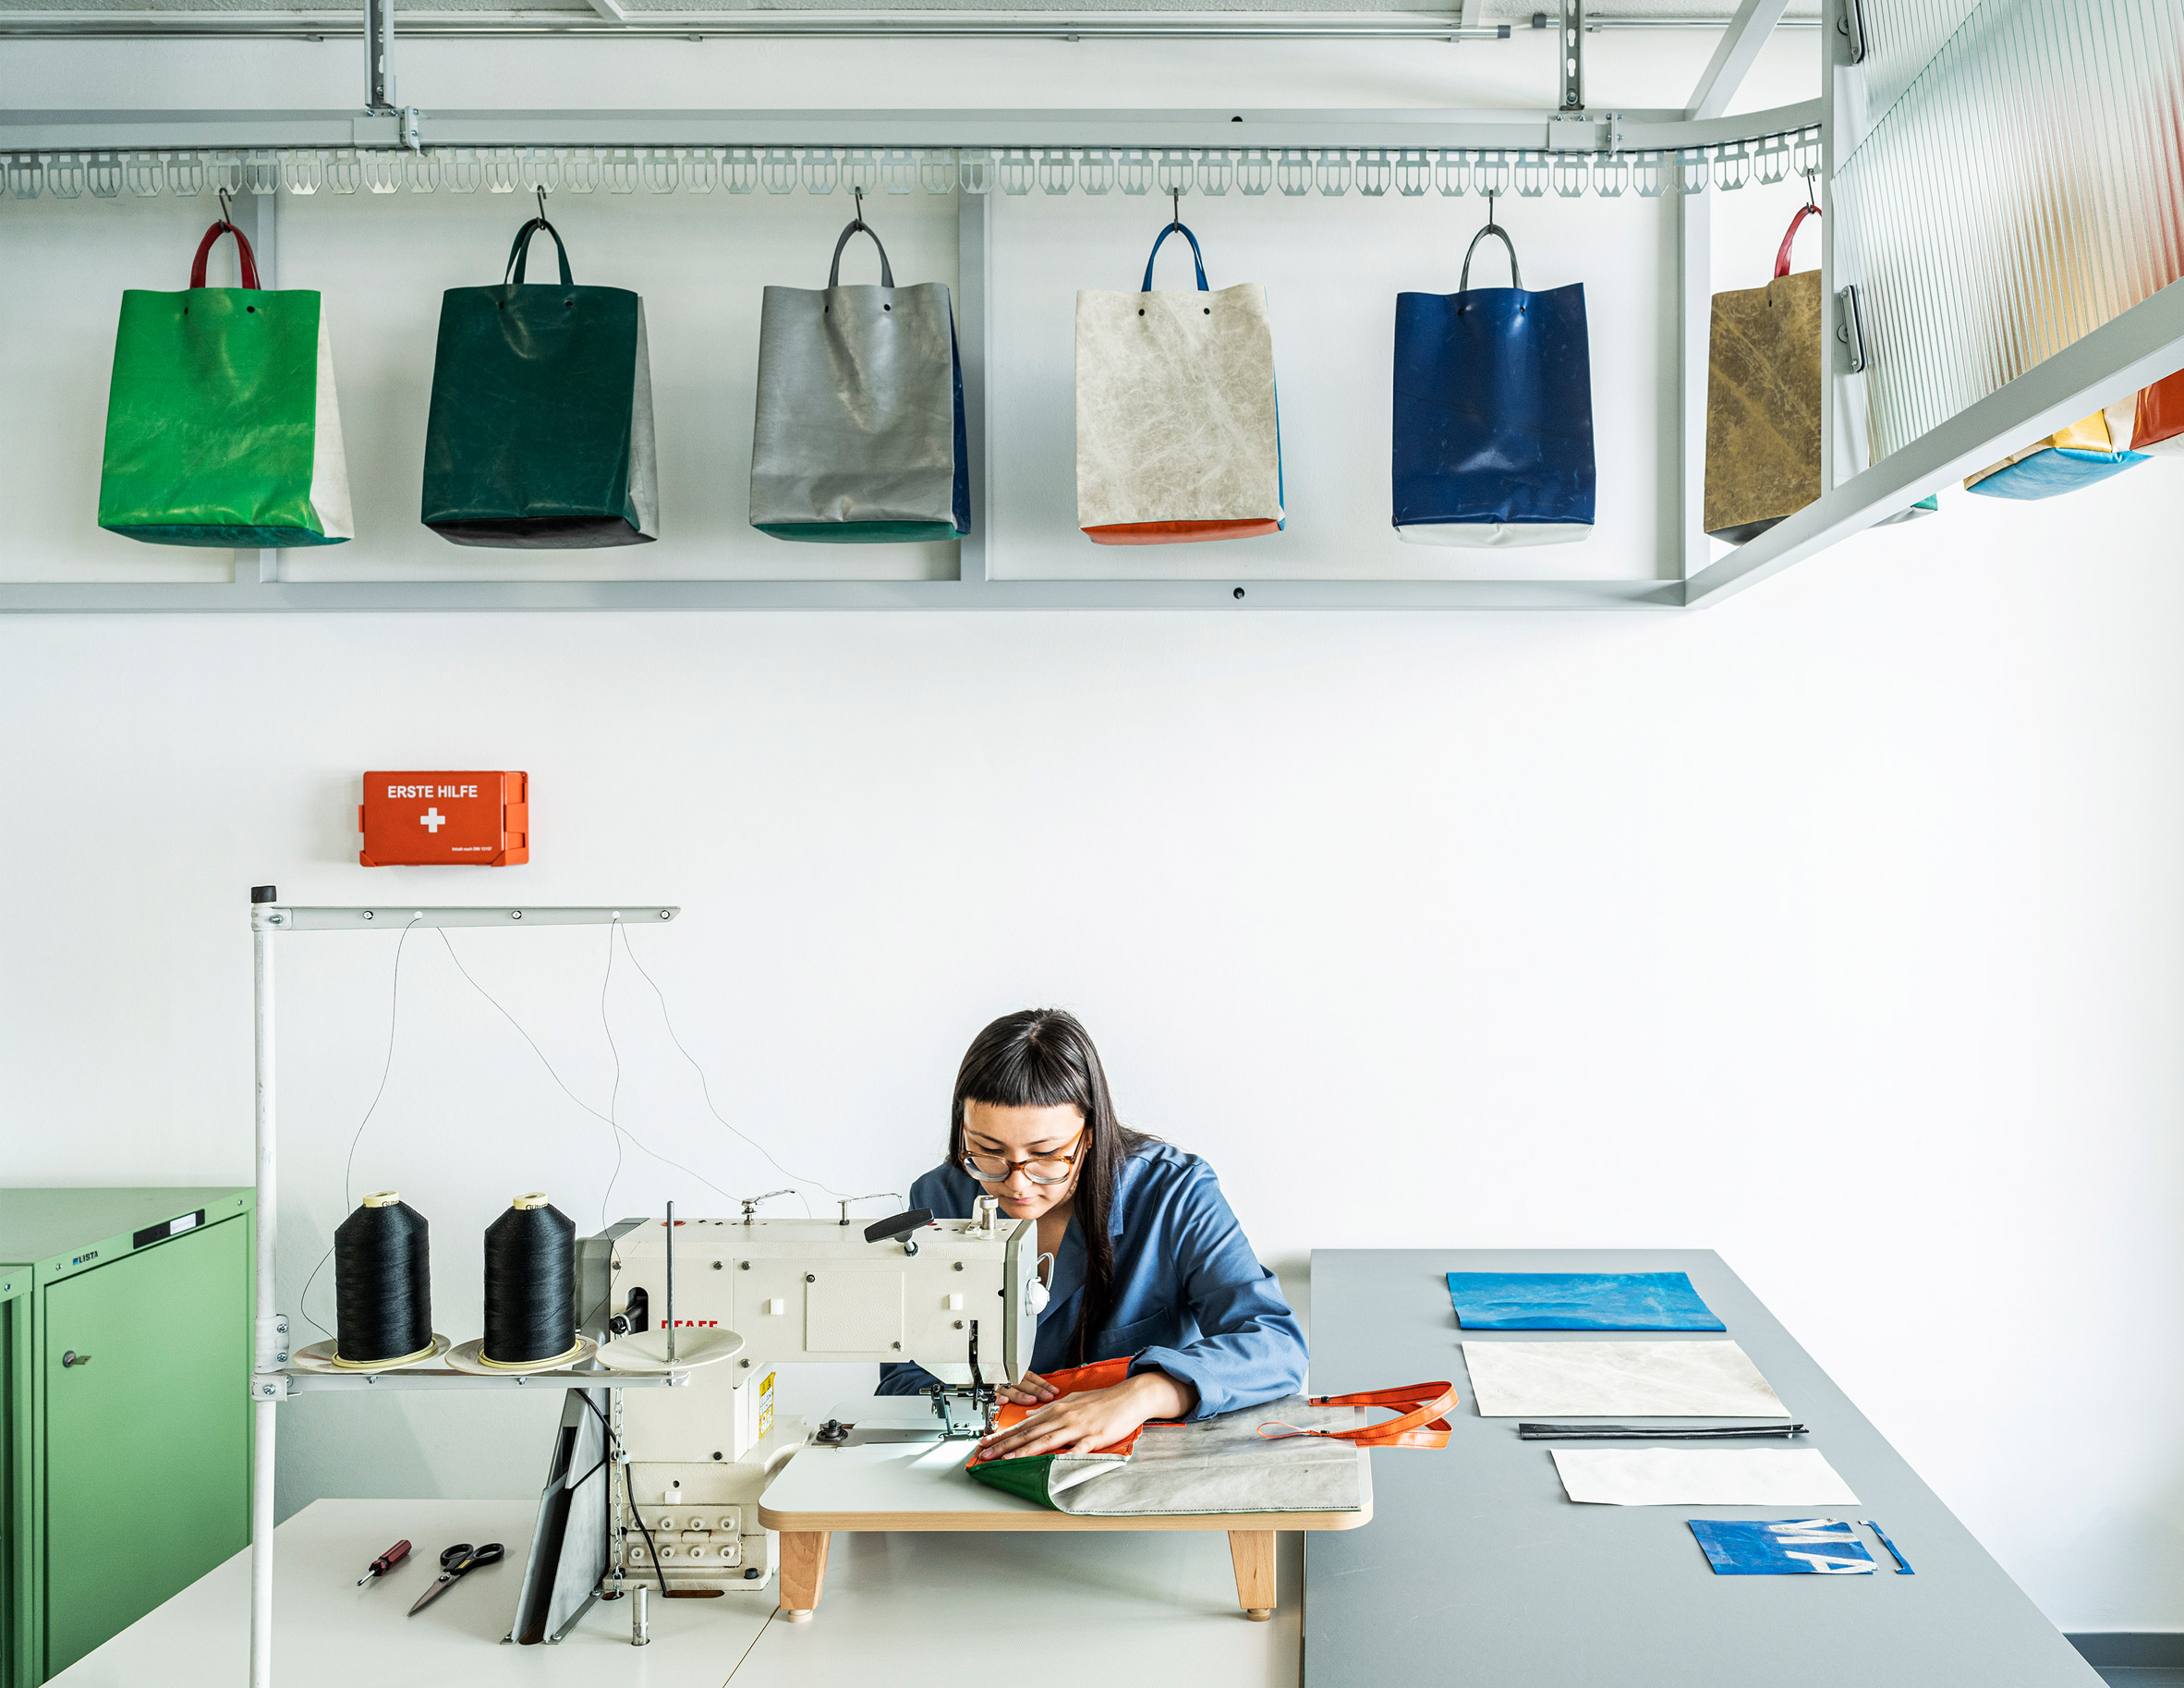 Sewing process of Sweat-Yourself-Shop by Freitag